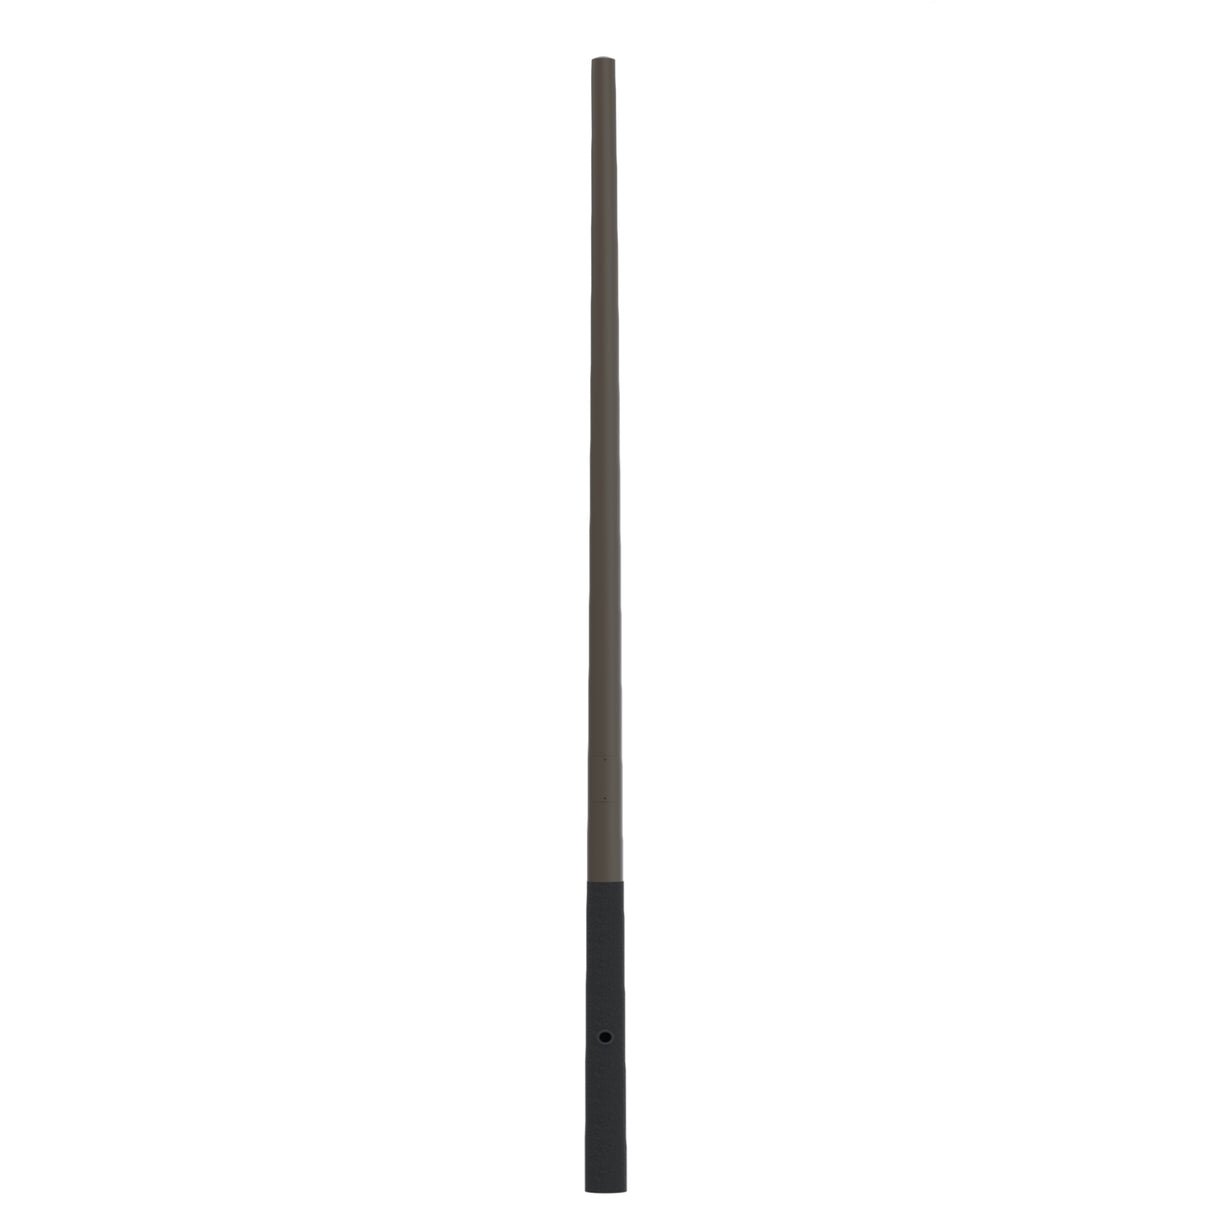 12' Above Grade x 5.0" Base OD x 3.0" Top OD x 0.125" Thick, Round Tapered Aluminum, Direct Burial Light Pole